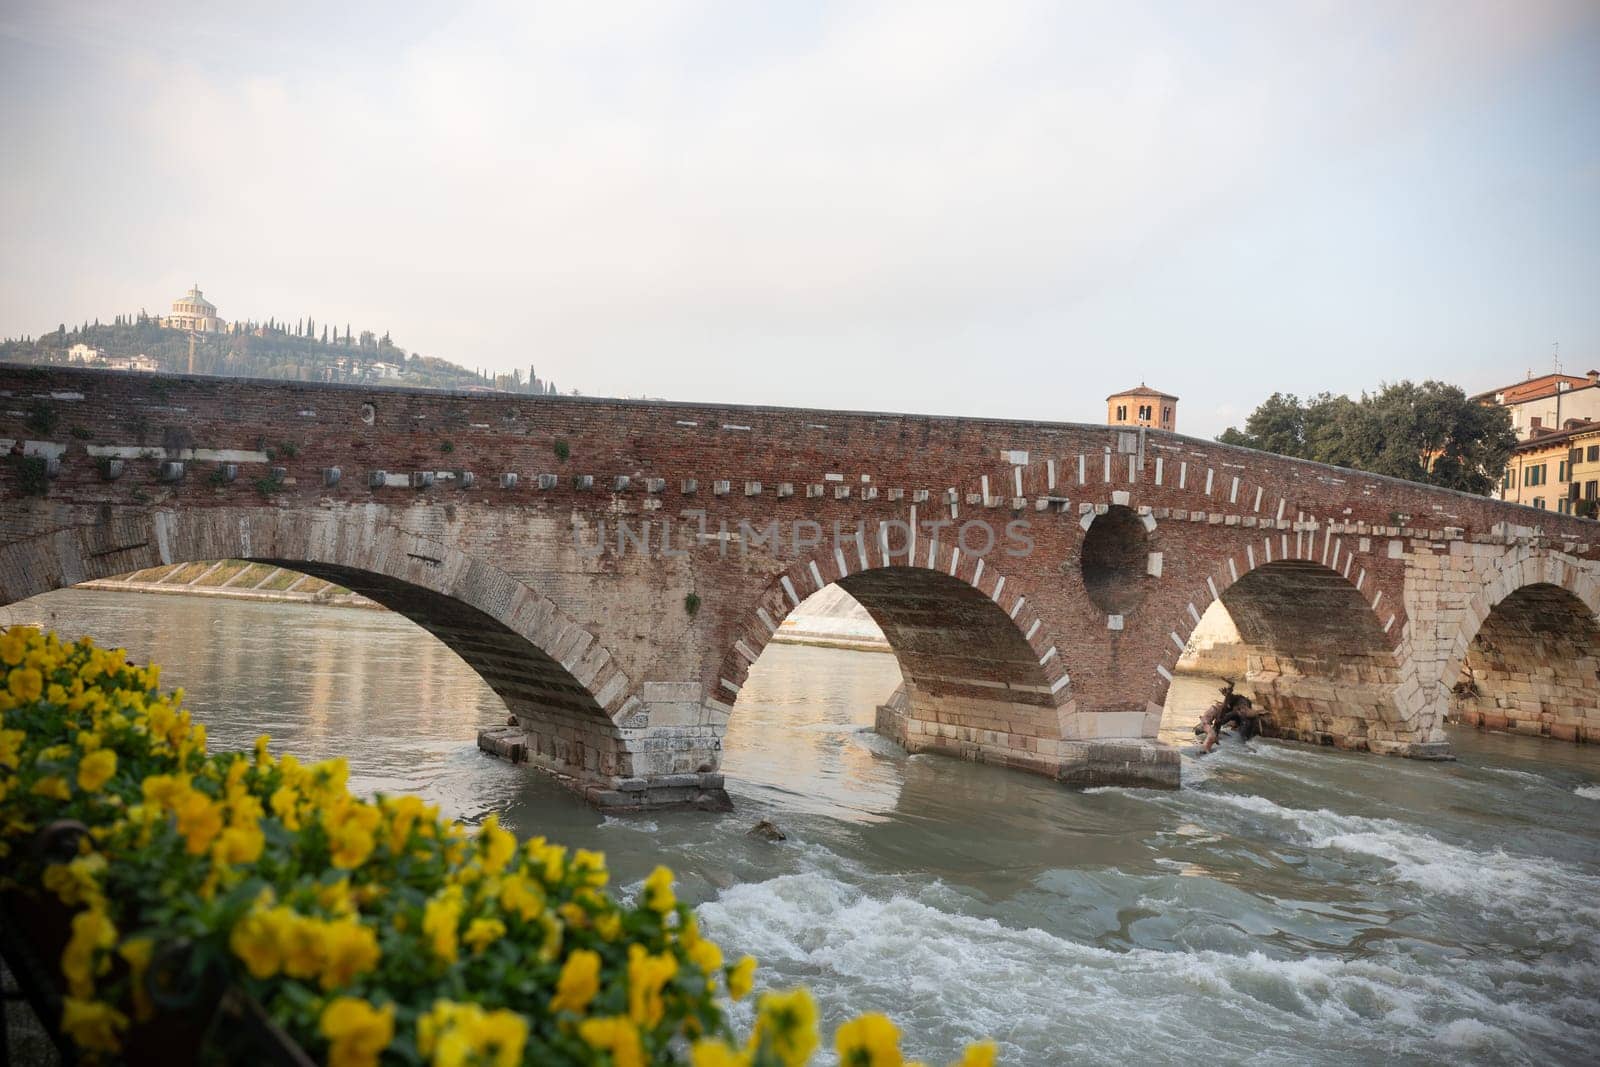 An arched bridge over flowing water - italian medieval landscape, Verona